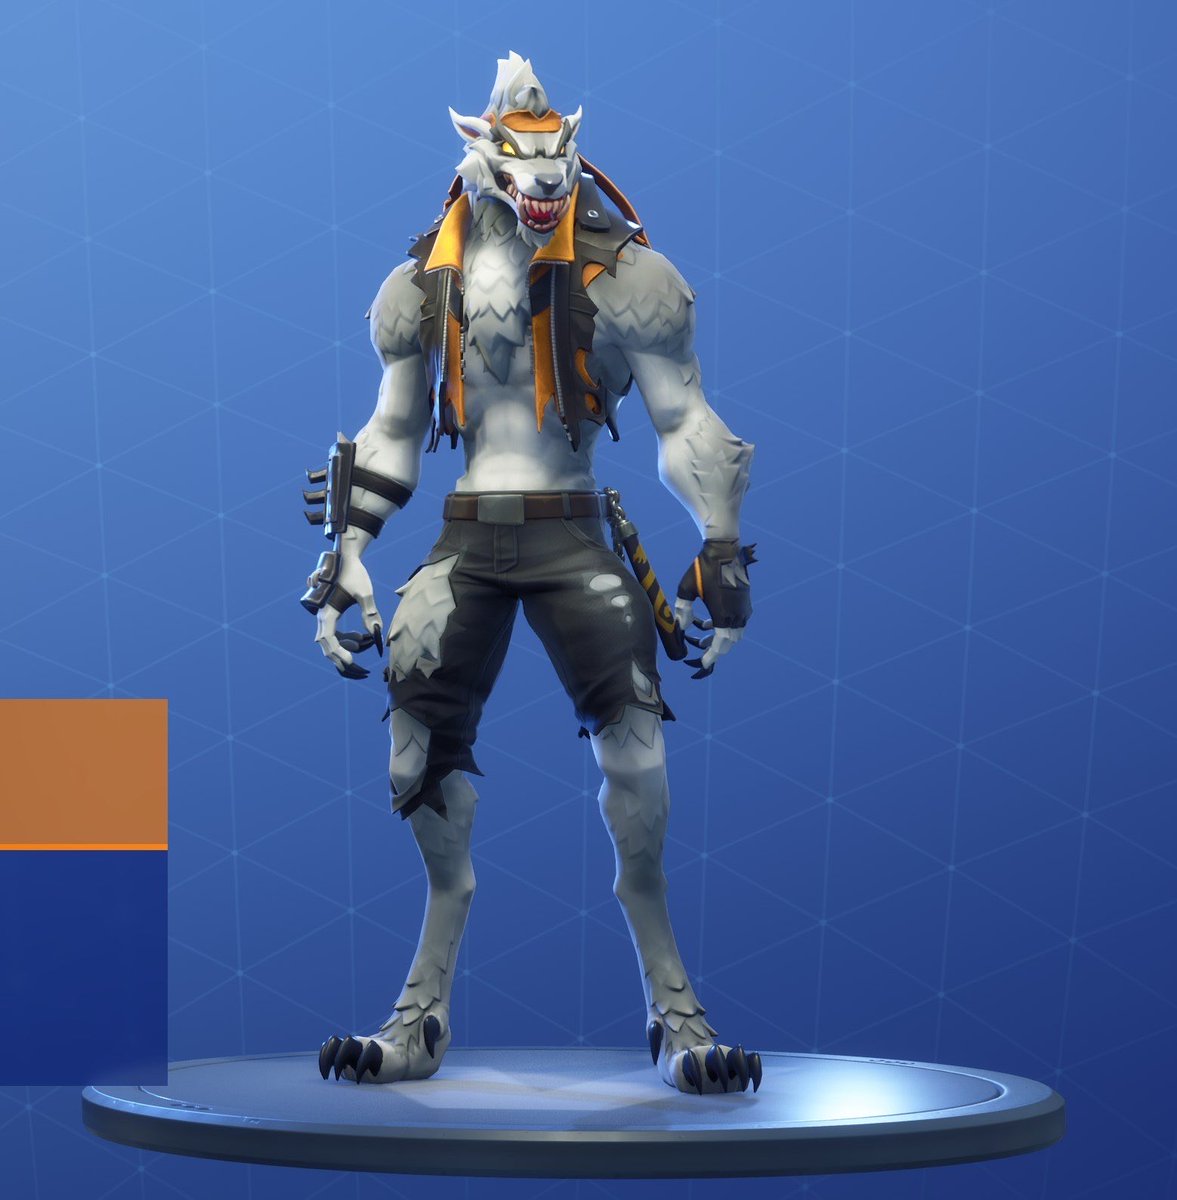 So proud of @its_dwolf for getting his own skin in Fortnite. 